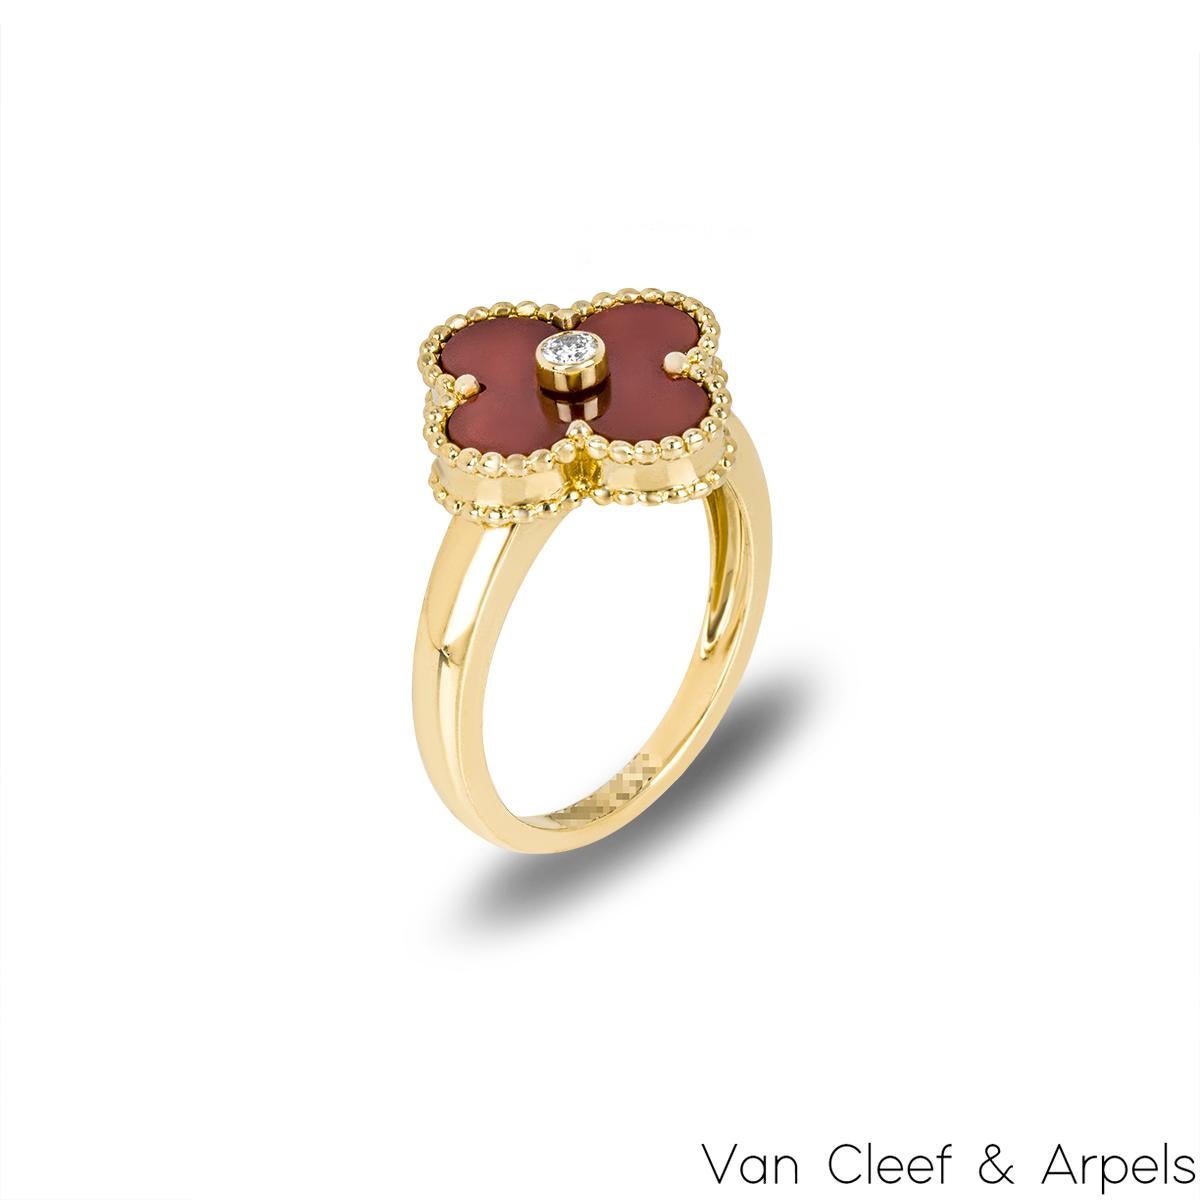 A beautiful 18k yellow gold Van Cleef & Arpels ring from the Vintage Alhambra collection. The ring features a four leaf clover motif with a carnelian inlay, complemented by a beaded edge and a round brilliant cut diamond set to the centre weighing